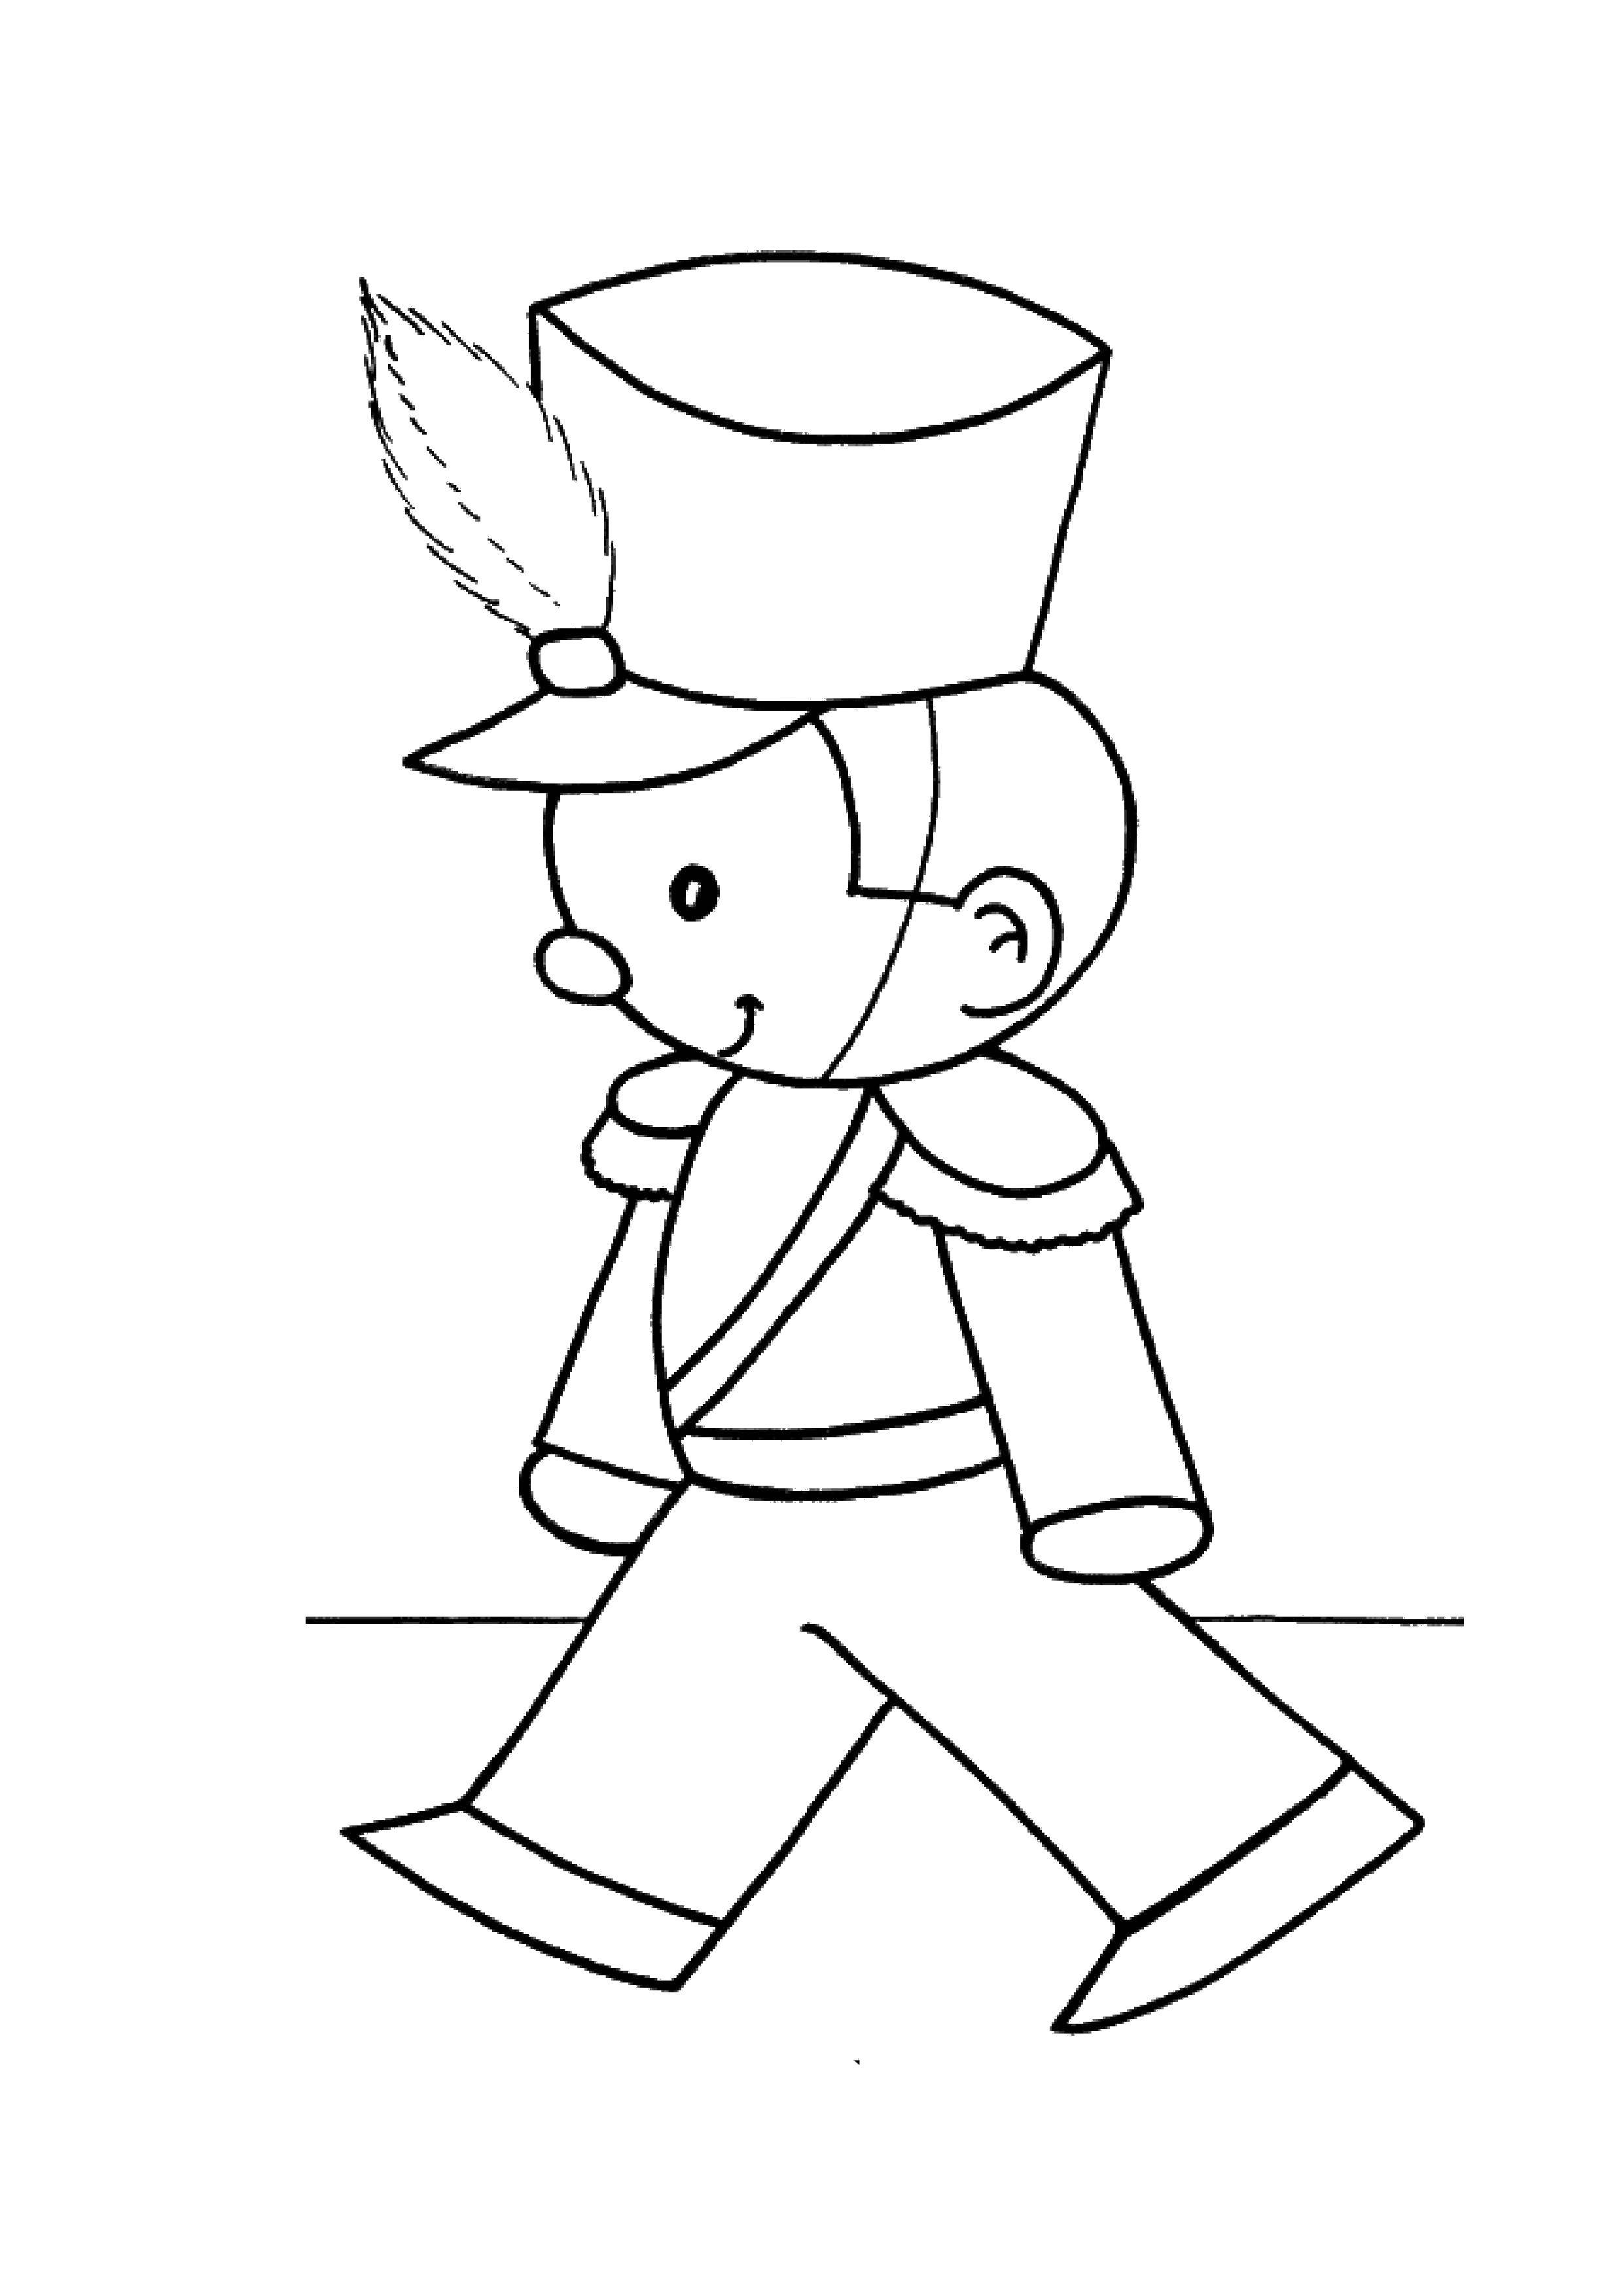 Coloring Soldier. Category toys. Tags:  Soldier, toy.